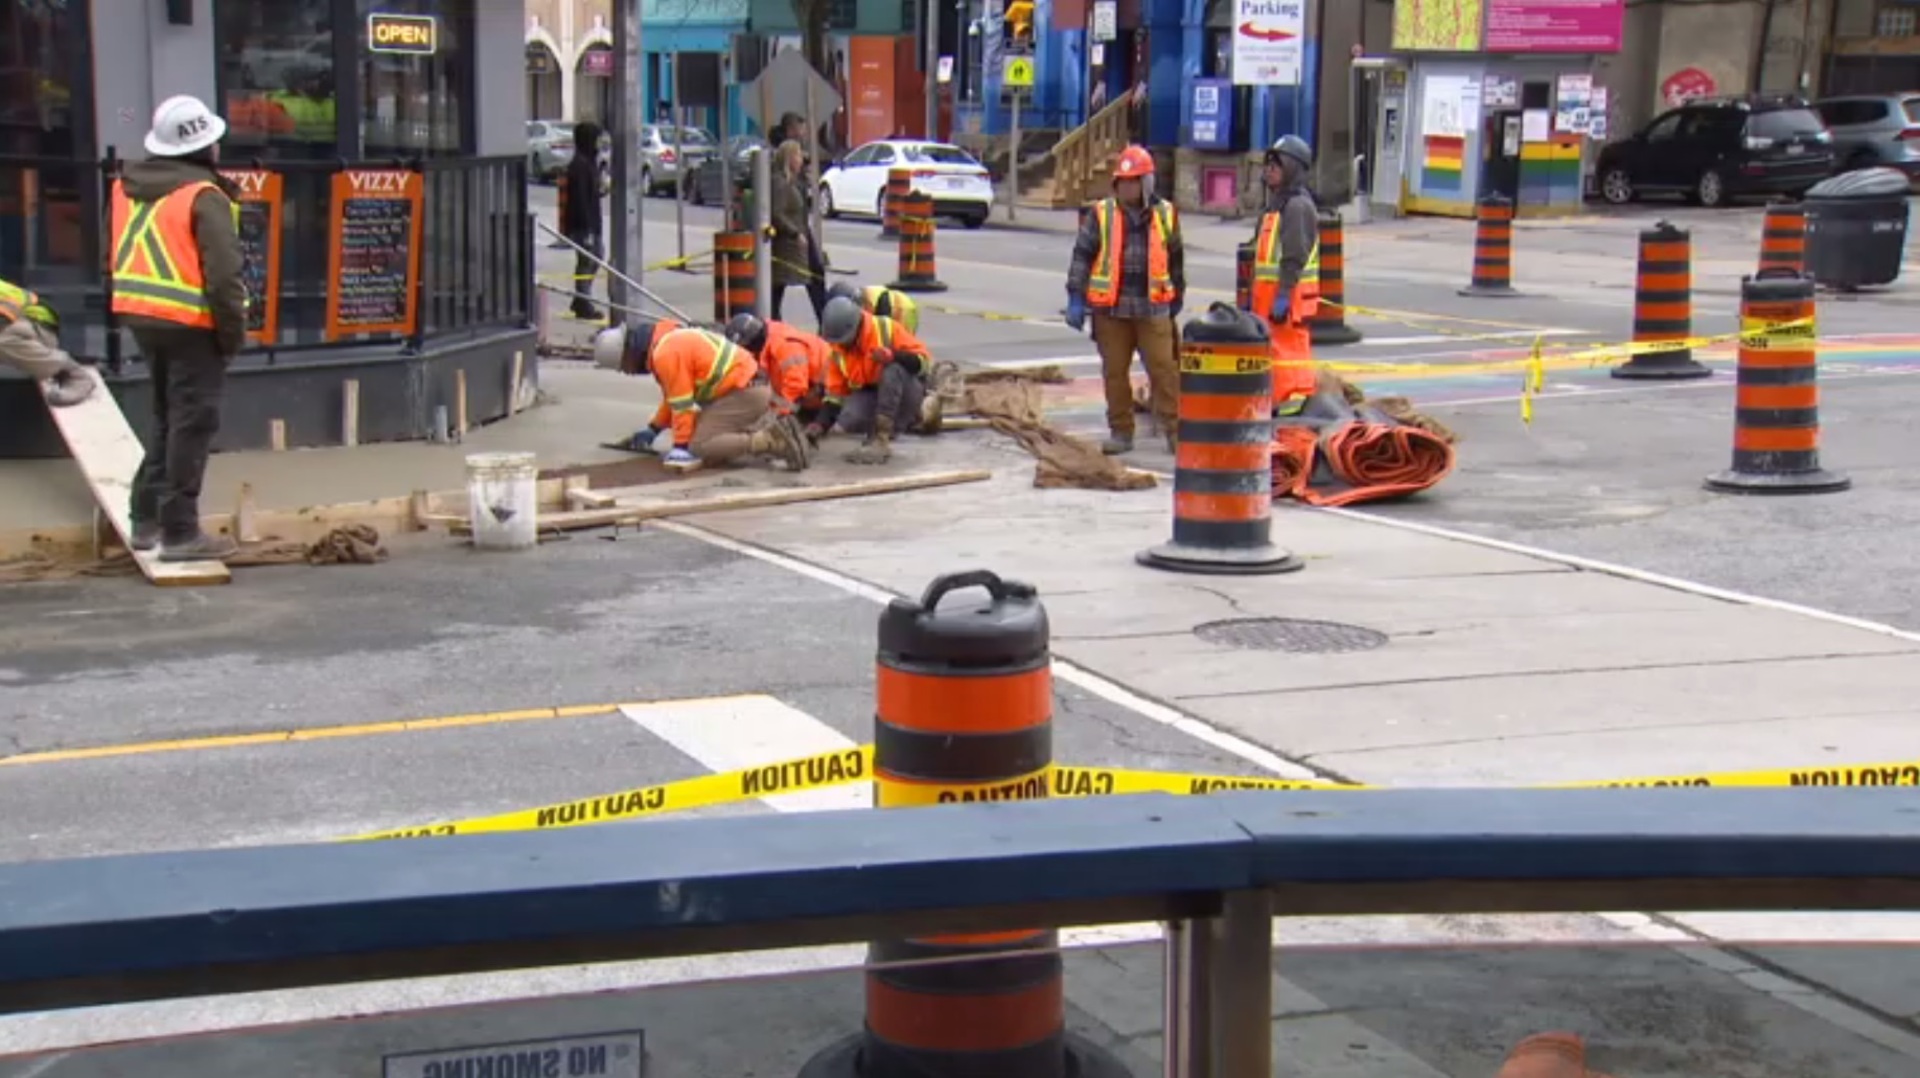 'Surprise attack': Toronto business outraged after city construction project interrupts operations